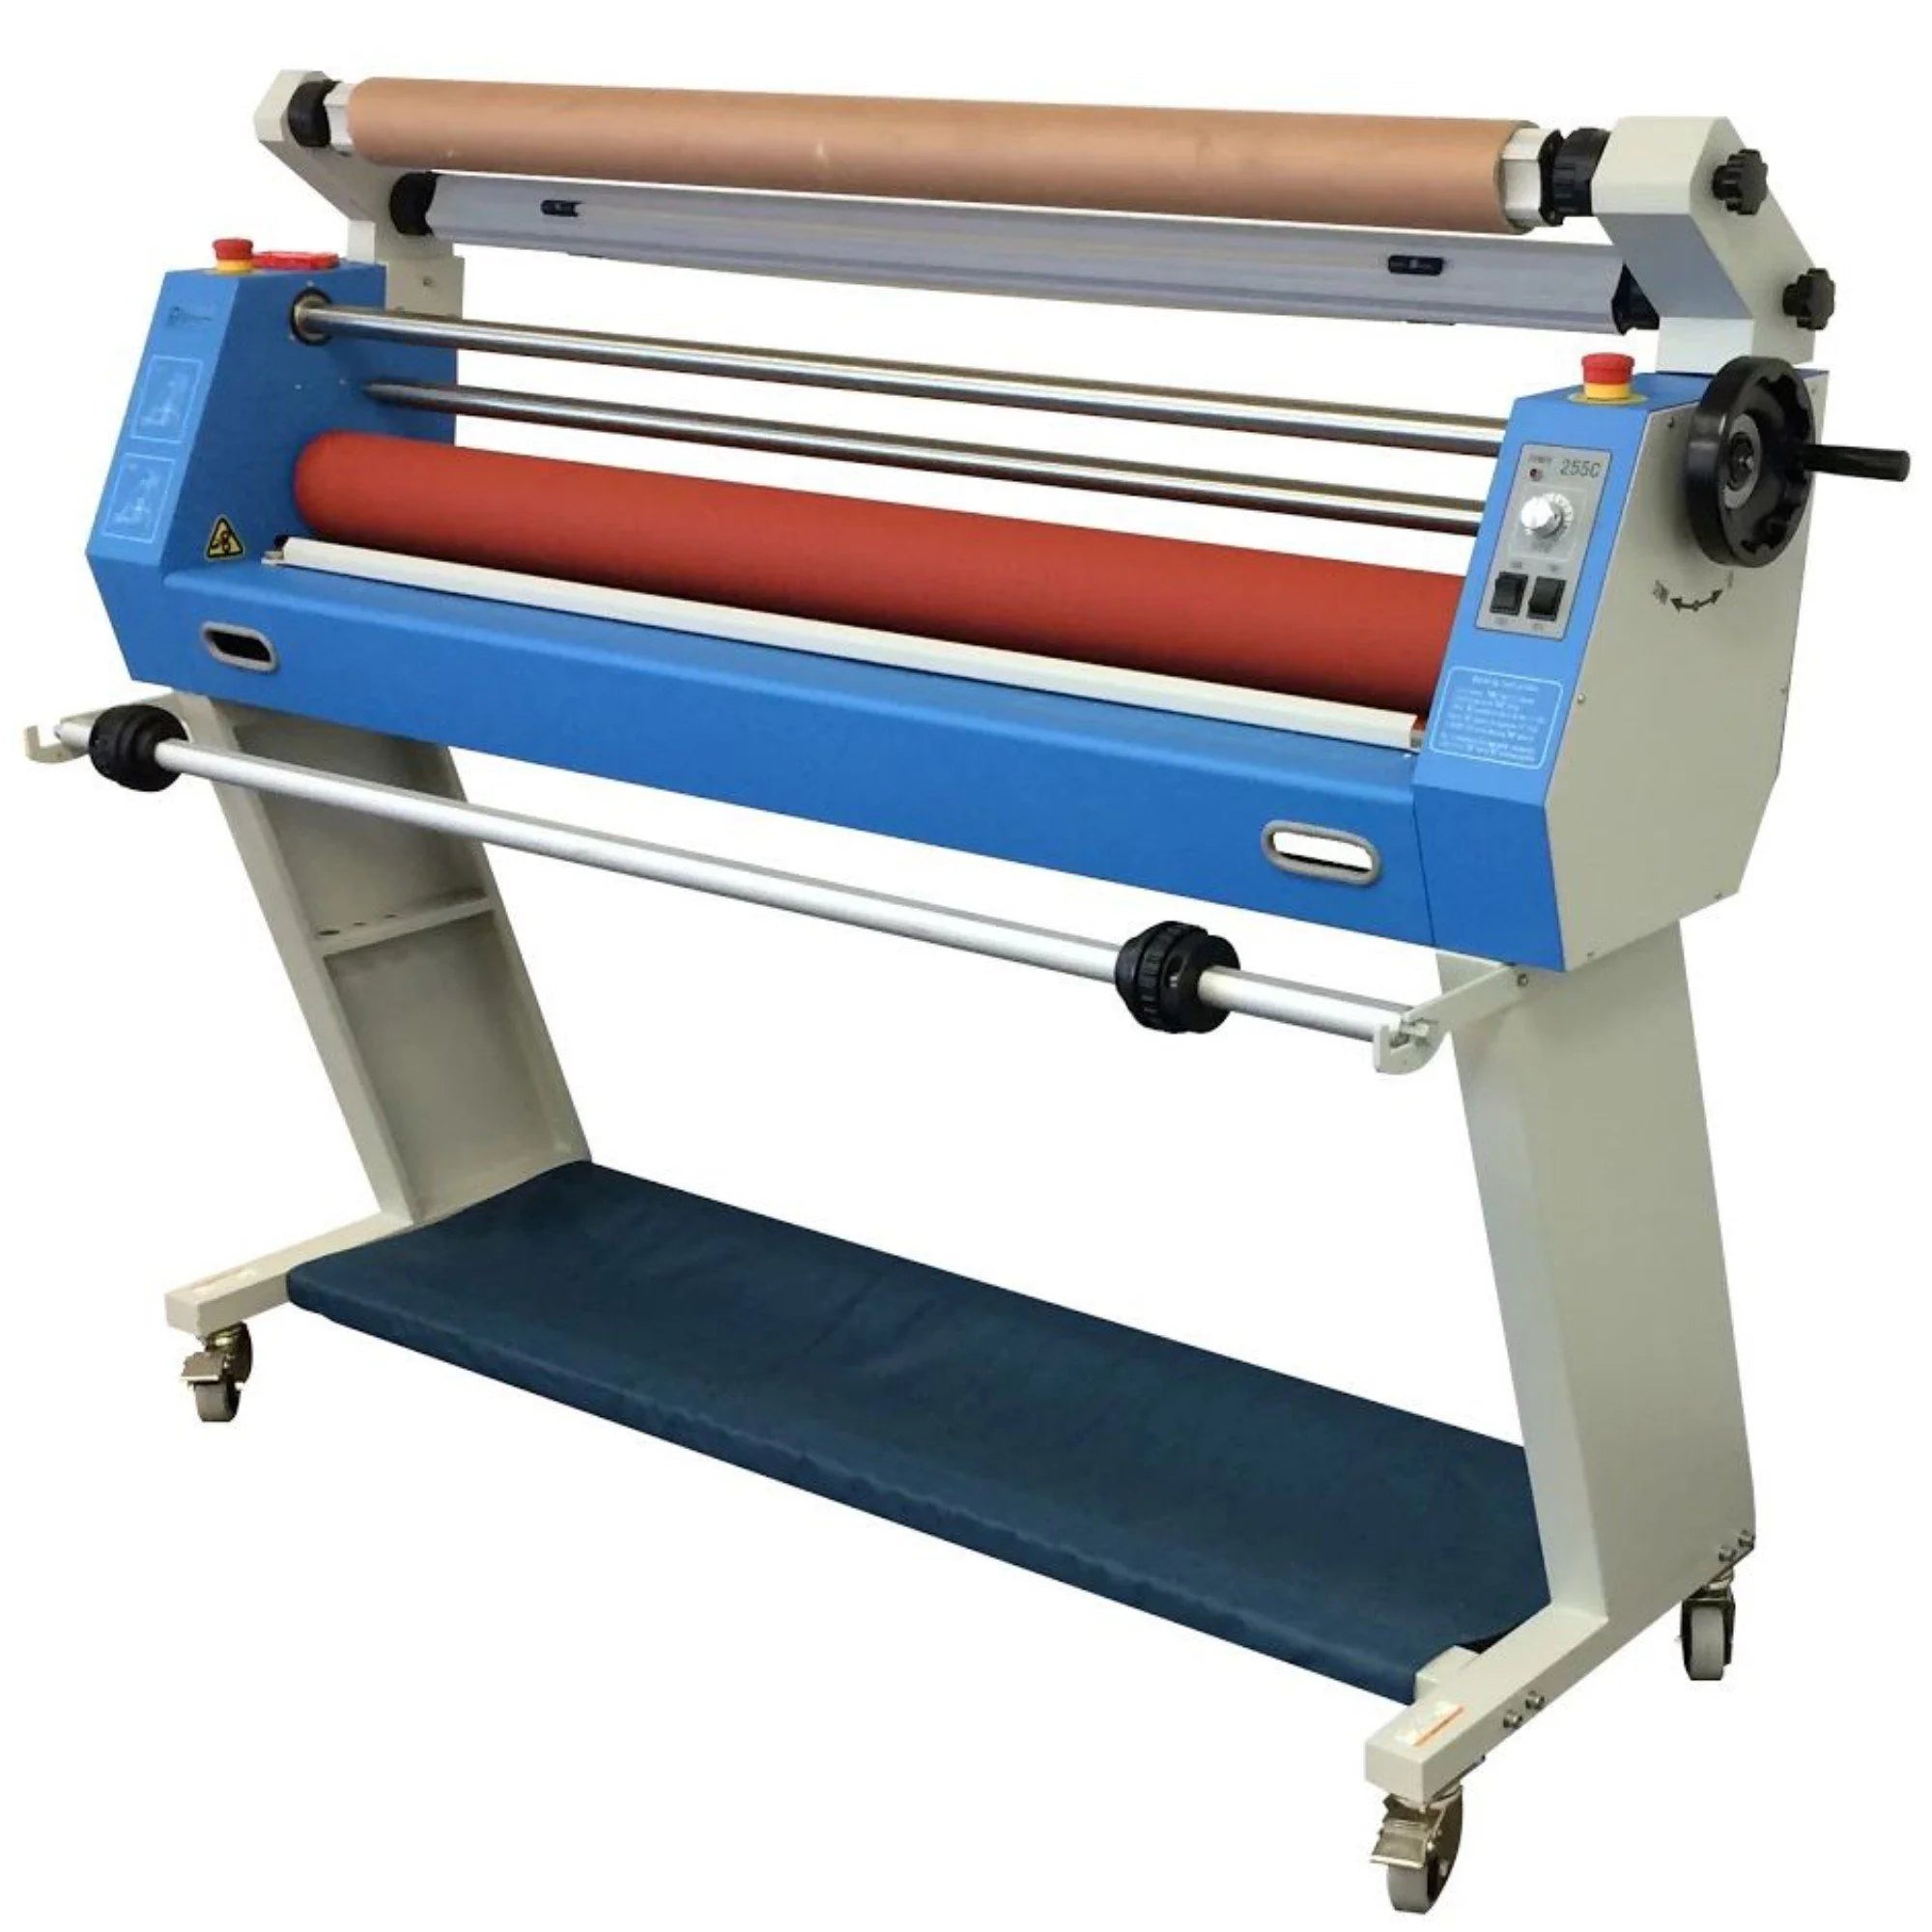 "GFP-263C Compact Cold Laminator with Stand - 63" Eco Printers - GFP" - An efficient and reliable cold laminator with a stand designed for 63" eco printers by GFP